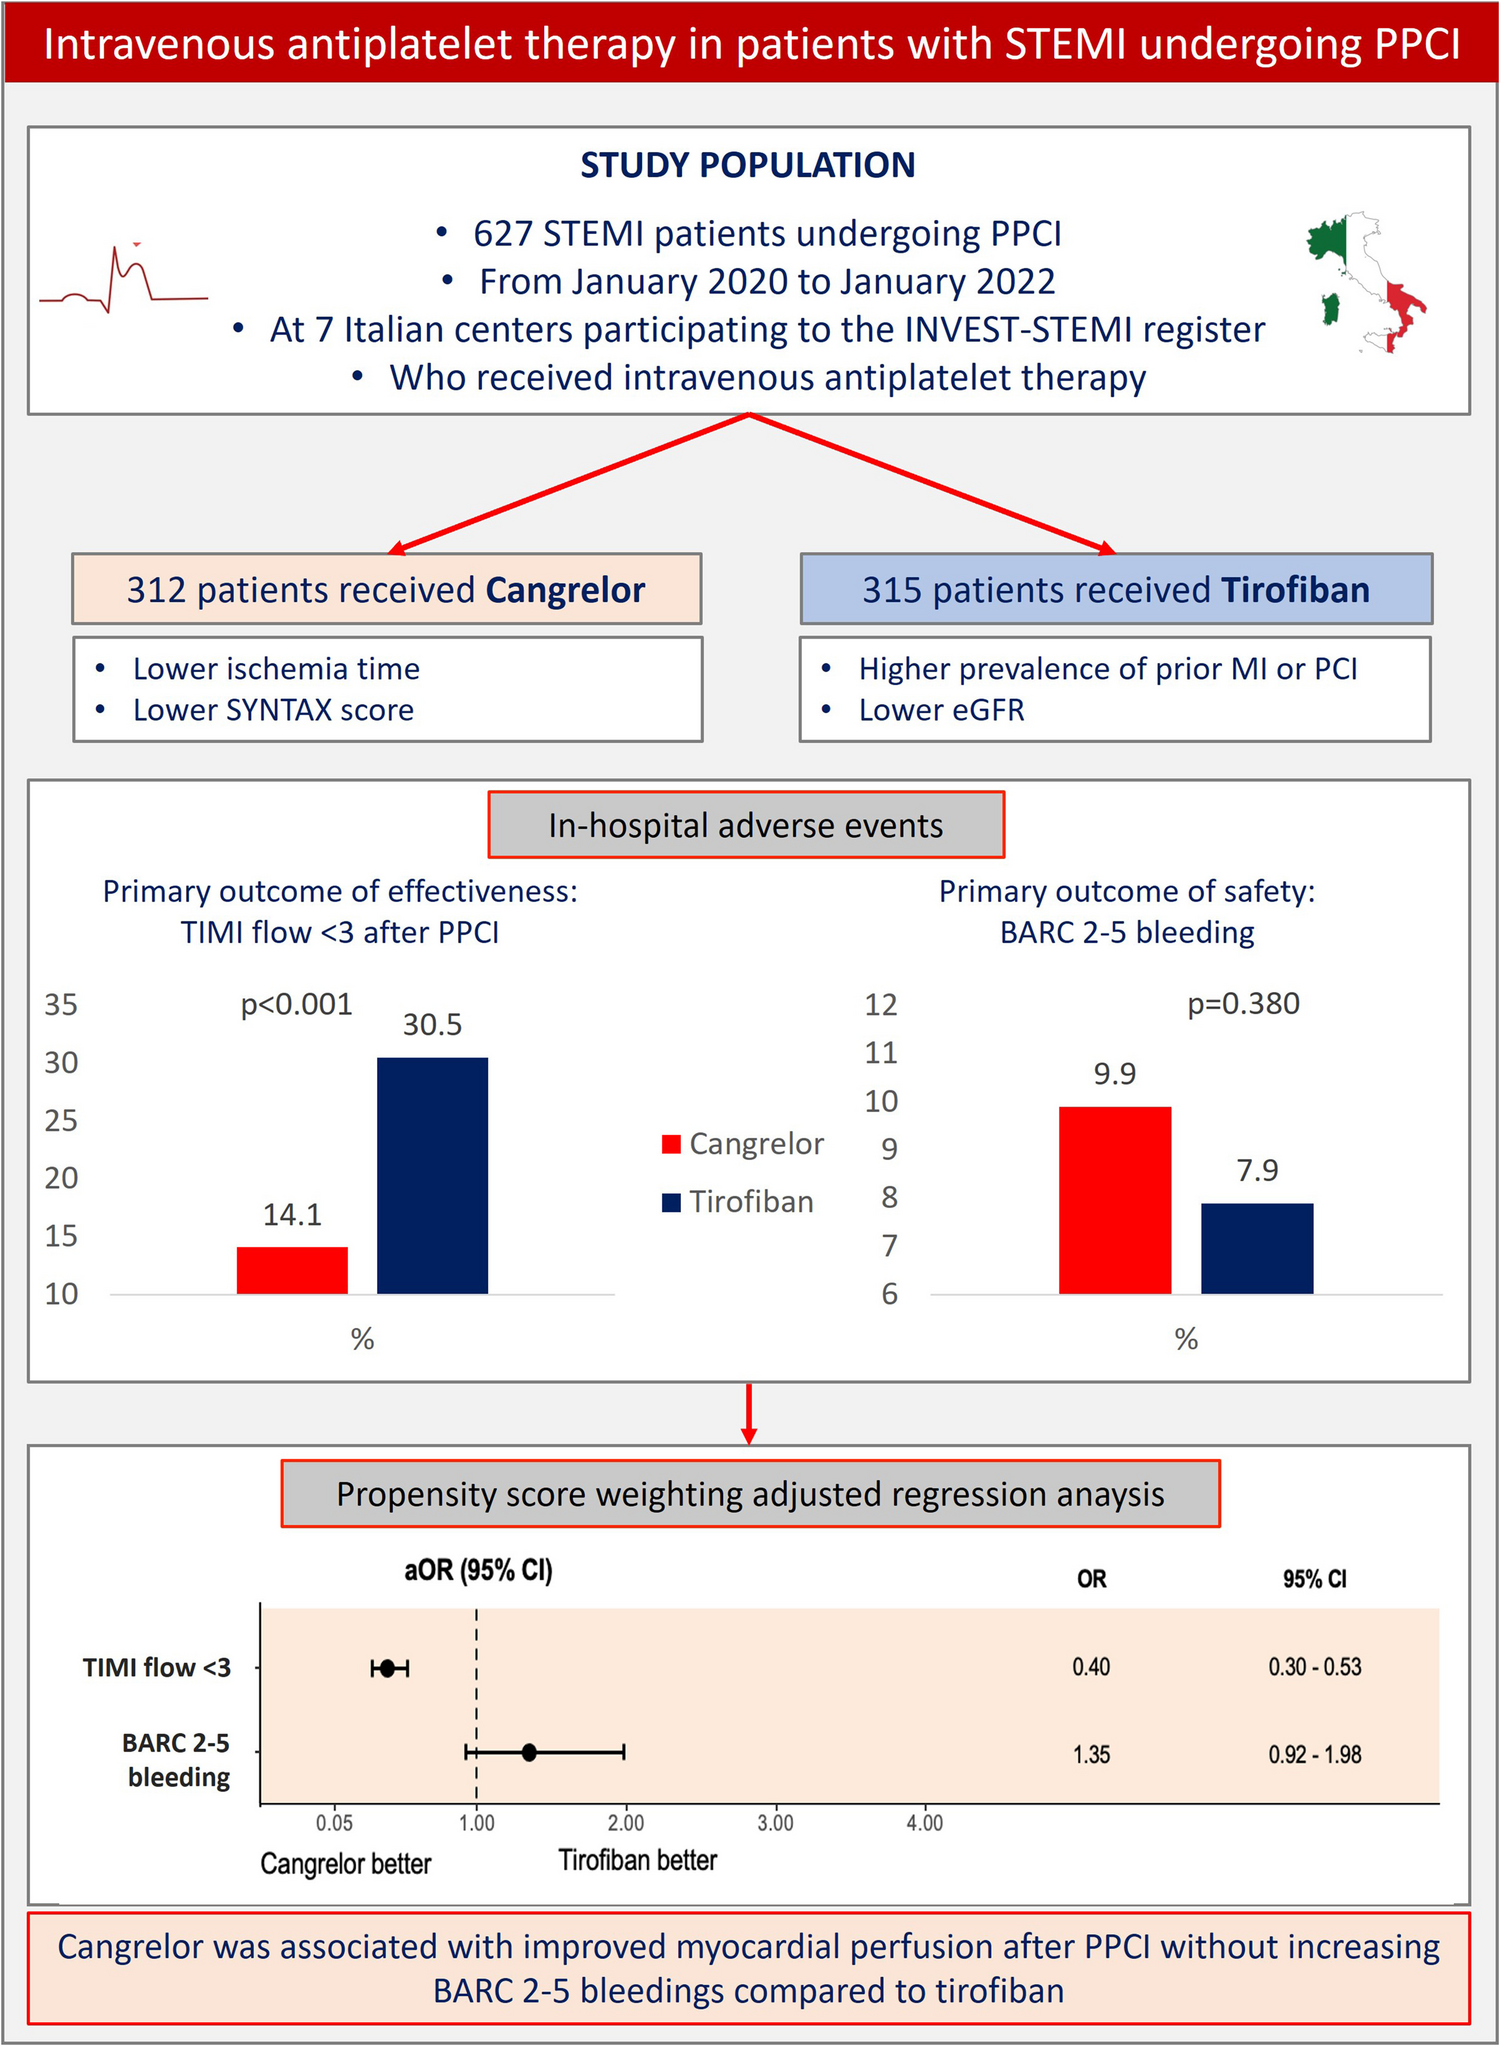 Intravenous antiplatelet therapy in patients with ST-segment elevation myocardial infarction undergoing primary percutaneous coronary intervention